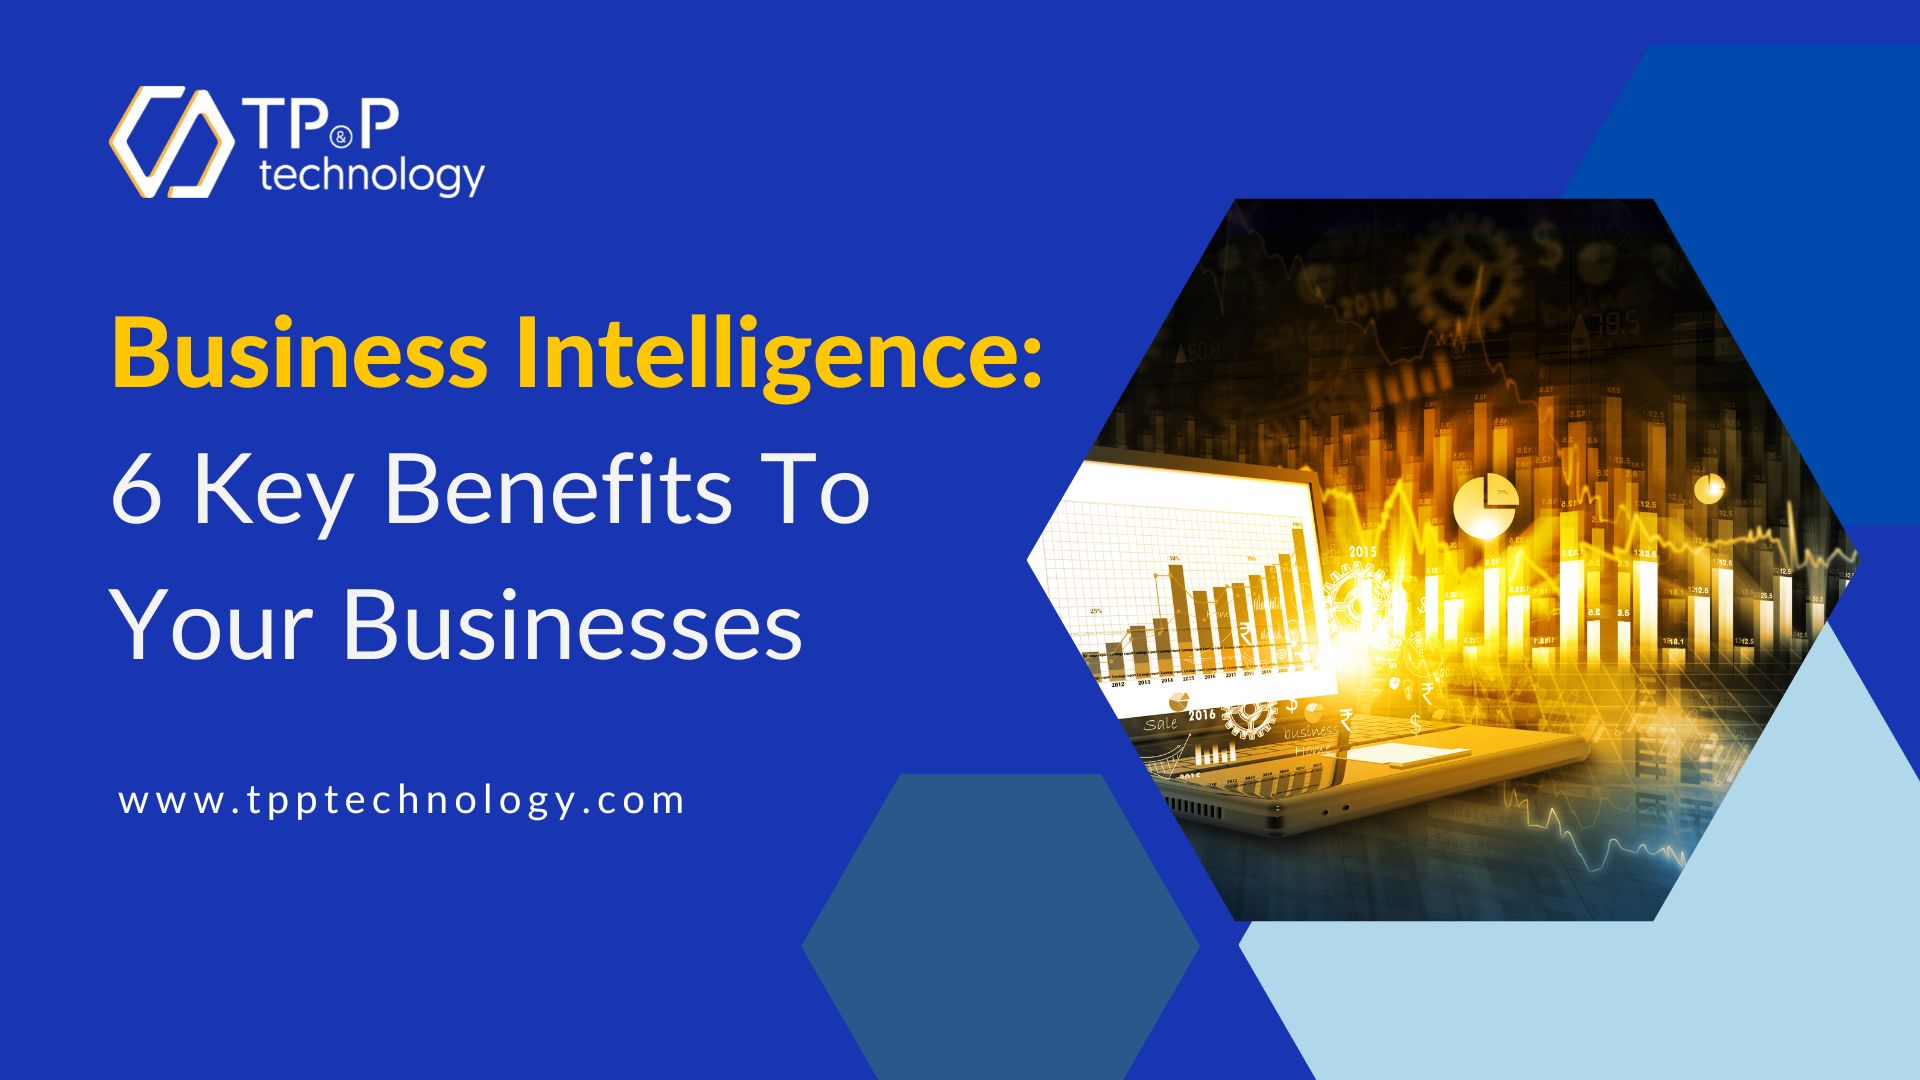 Business Intelligence: 6 Key Benefits To The Business